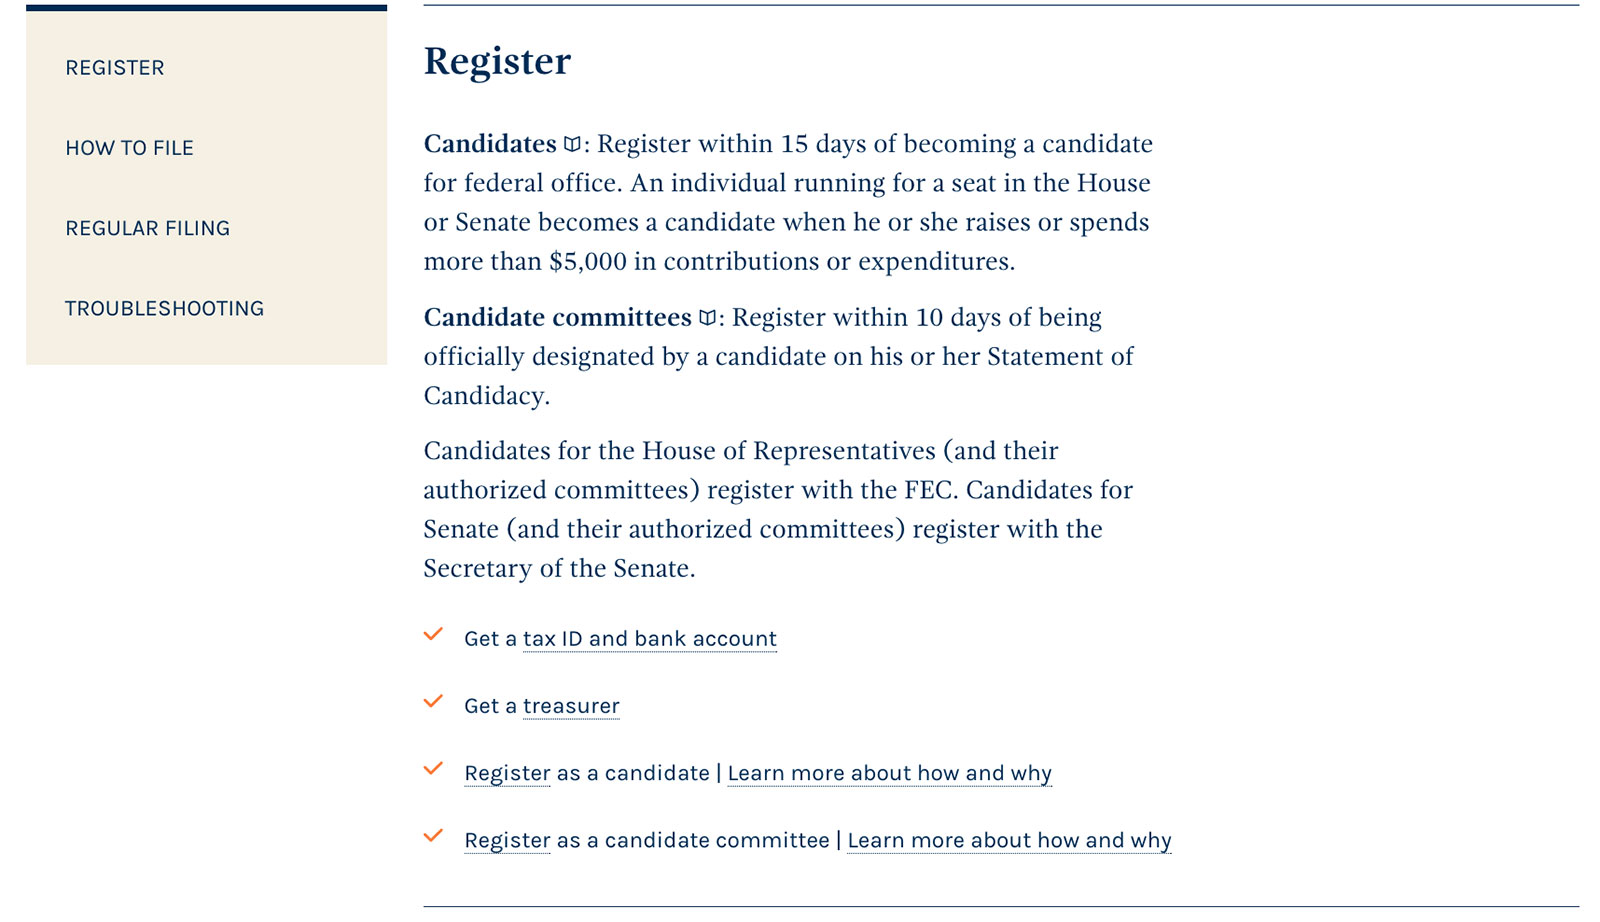 The new checklist for what you need to do to register with the FEC